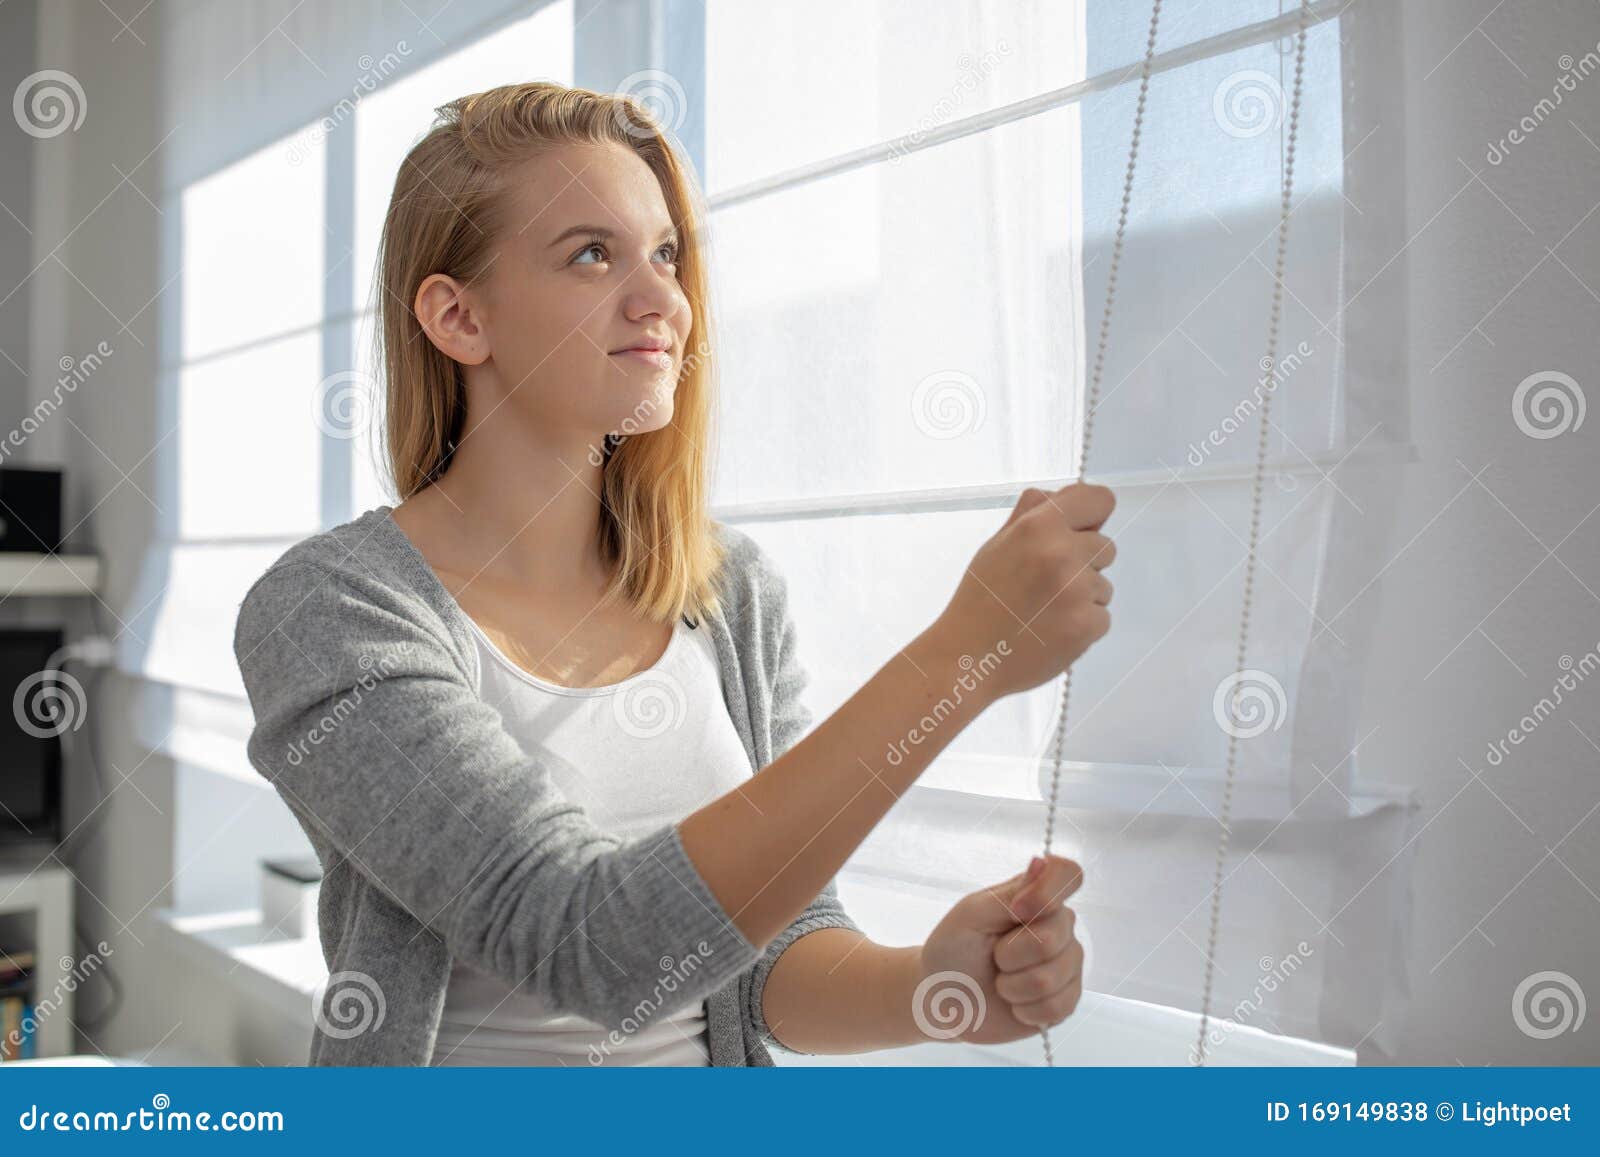 pretty, young woman lowering the interior shades/blinds